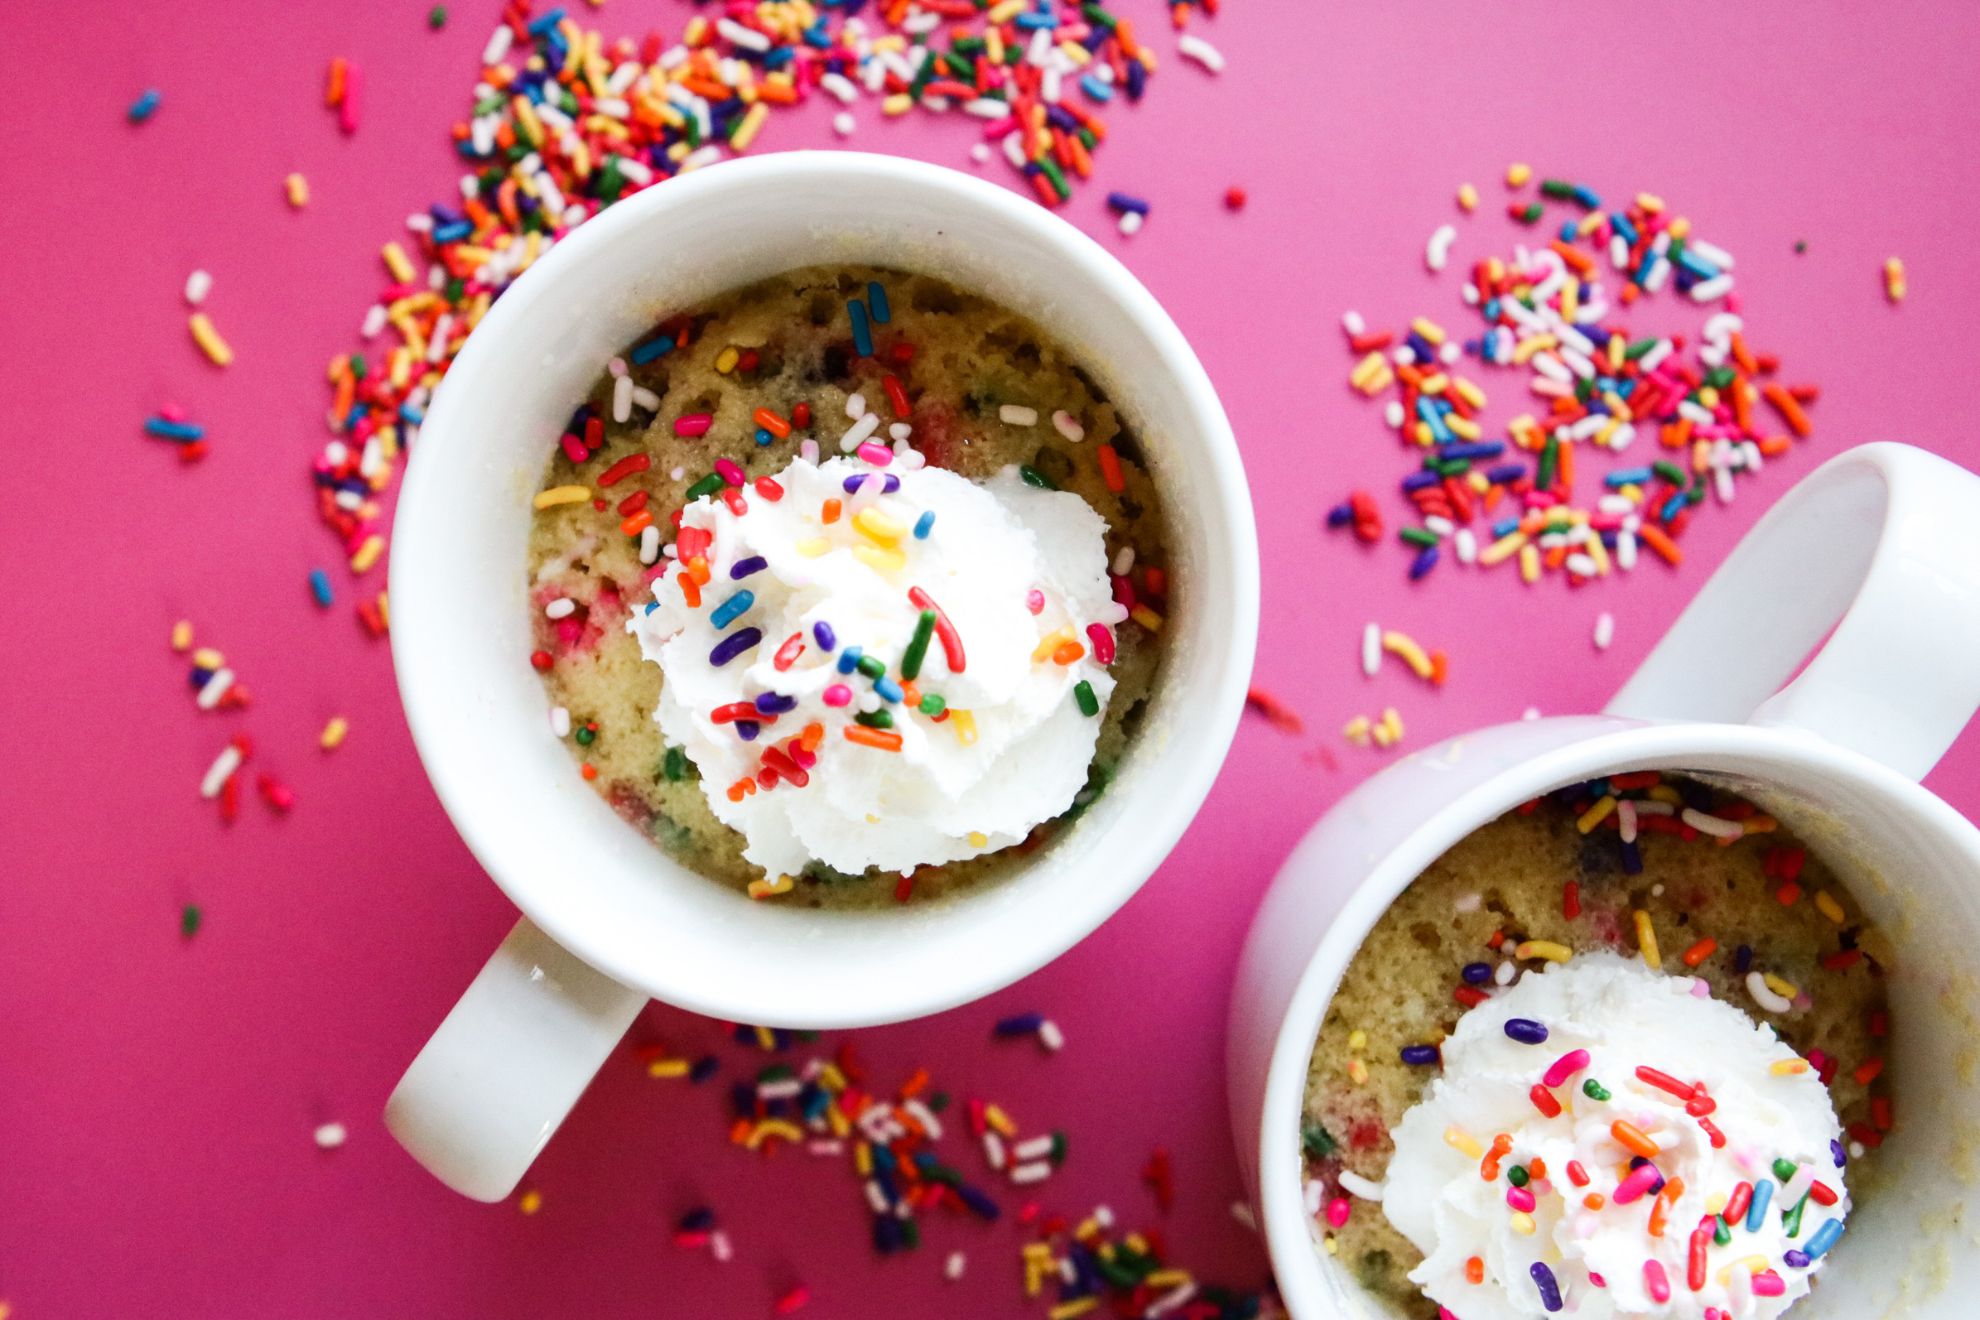 This is an overhead horizontal image of two white mugs with funfetti sprinkle cake in it. The mug cake has rainbow sprinkles mixed throughout the cake, is topped with whipped cream with more rainbow sprinkles sprinkled on top. The image focuses on one white mug in the center with the second mug cut off in the bottom right corner of the image. The white mugs sit on a dark pink surface with rainbow sprinkles scattered around them.